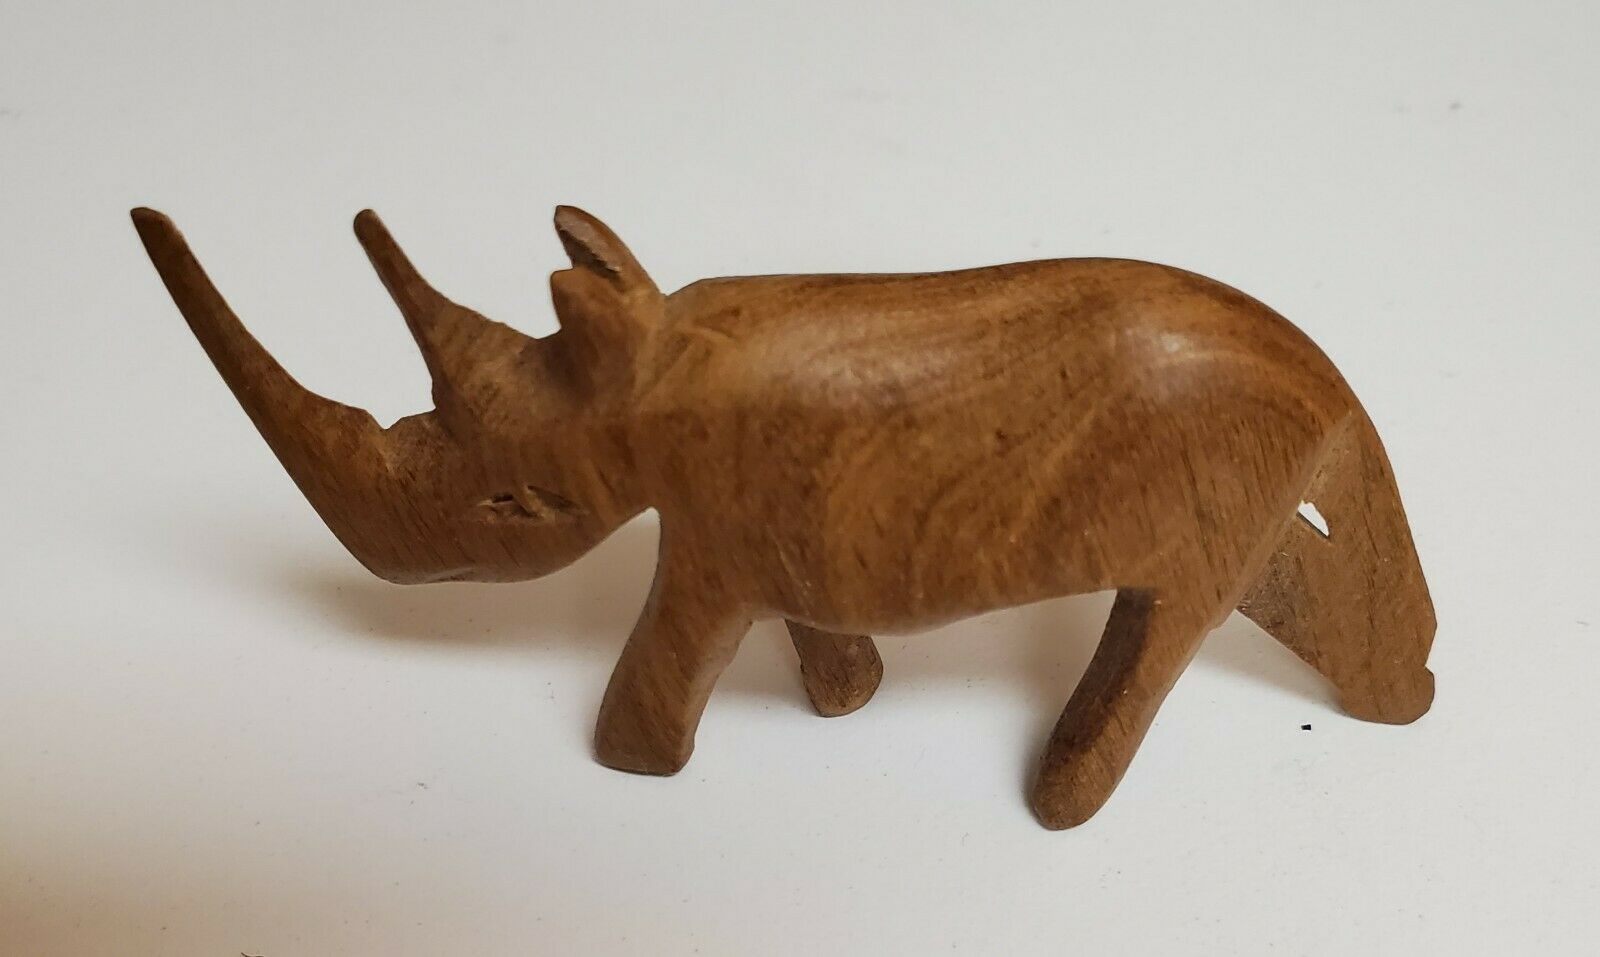 Hand Carved Wood Rhino Sculpture  2 3/4" - 1 1/4" Ships Free